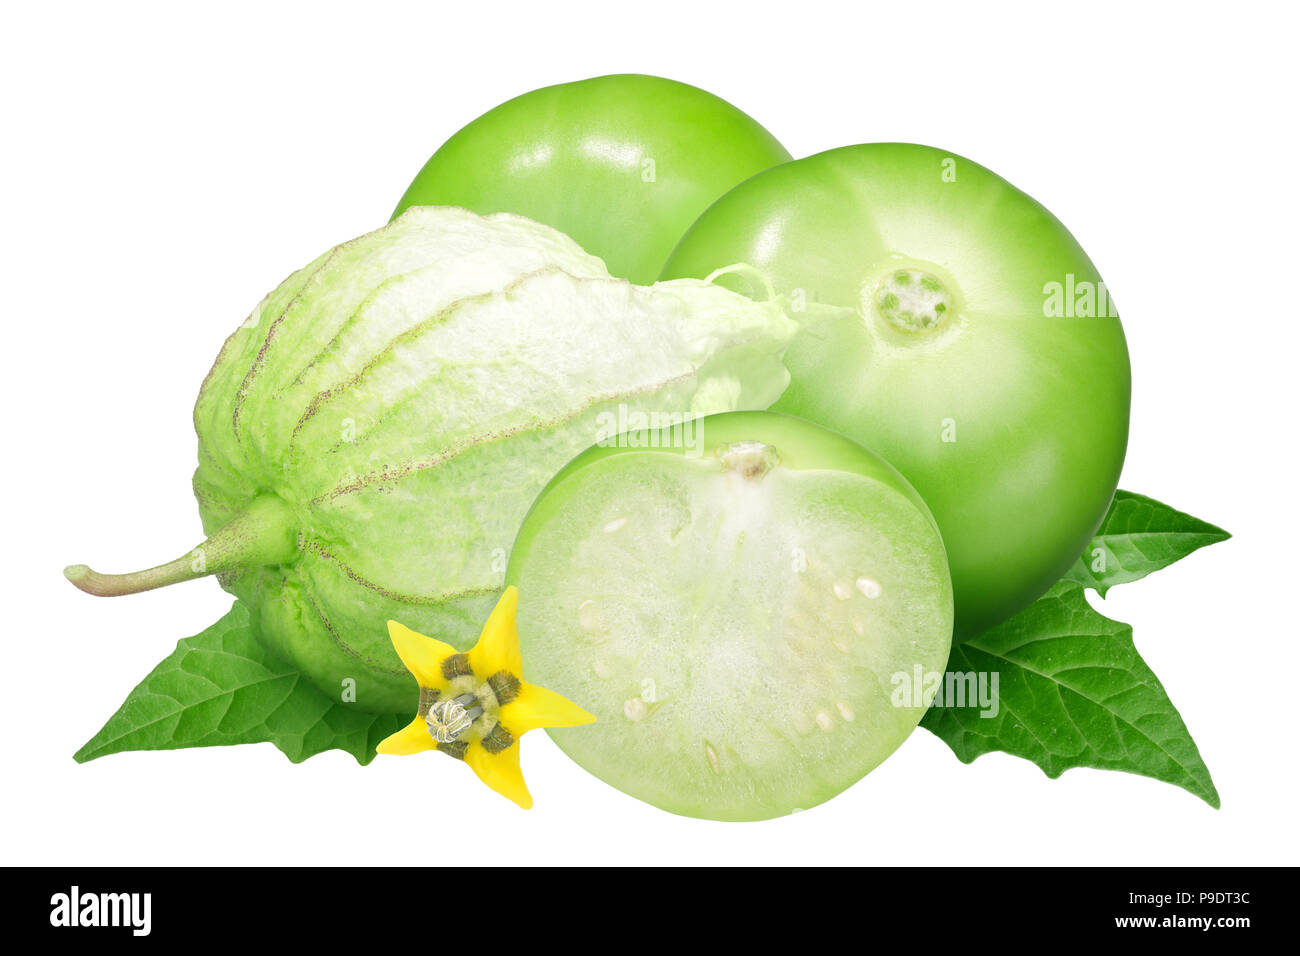 Tomatillo or Mexican husk tomato (Physalis philadelphica fruit) husked, with flower and leaves Stock Photo